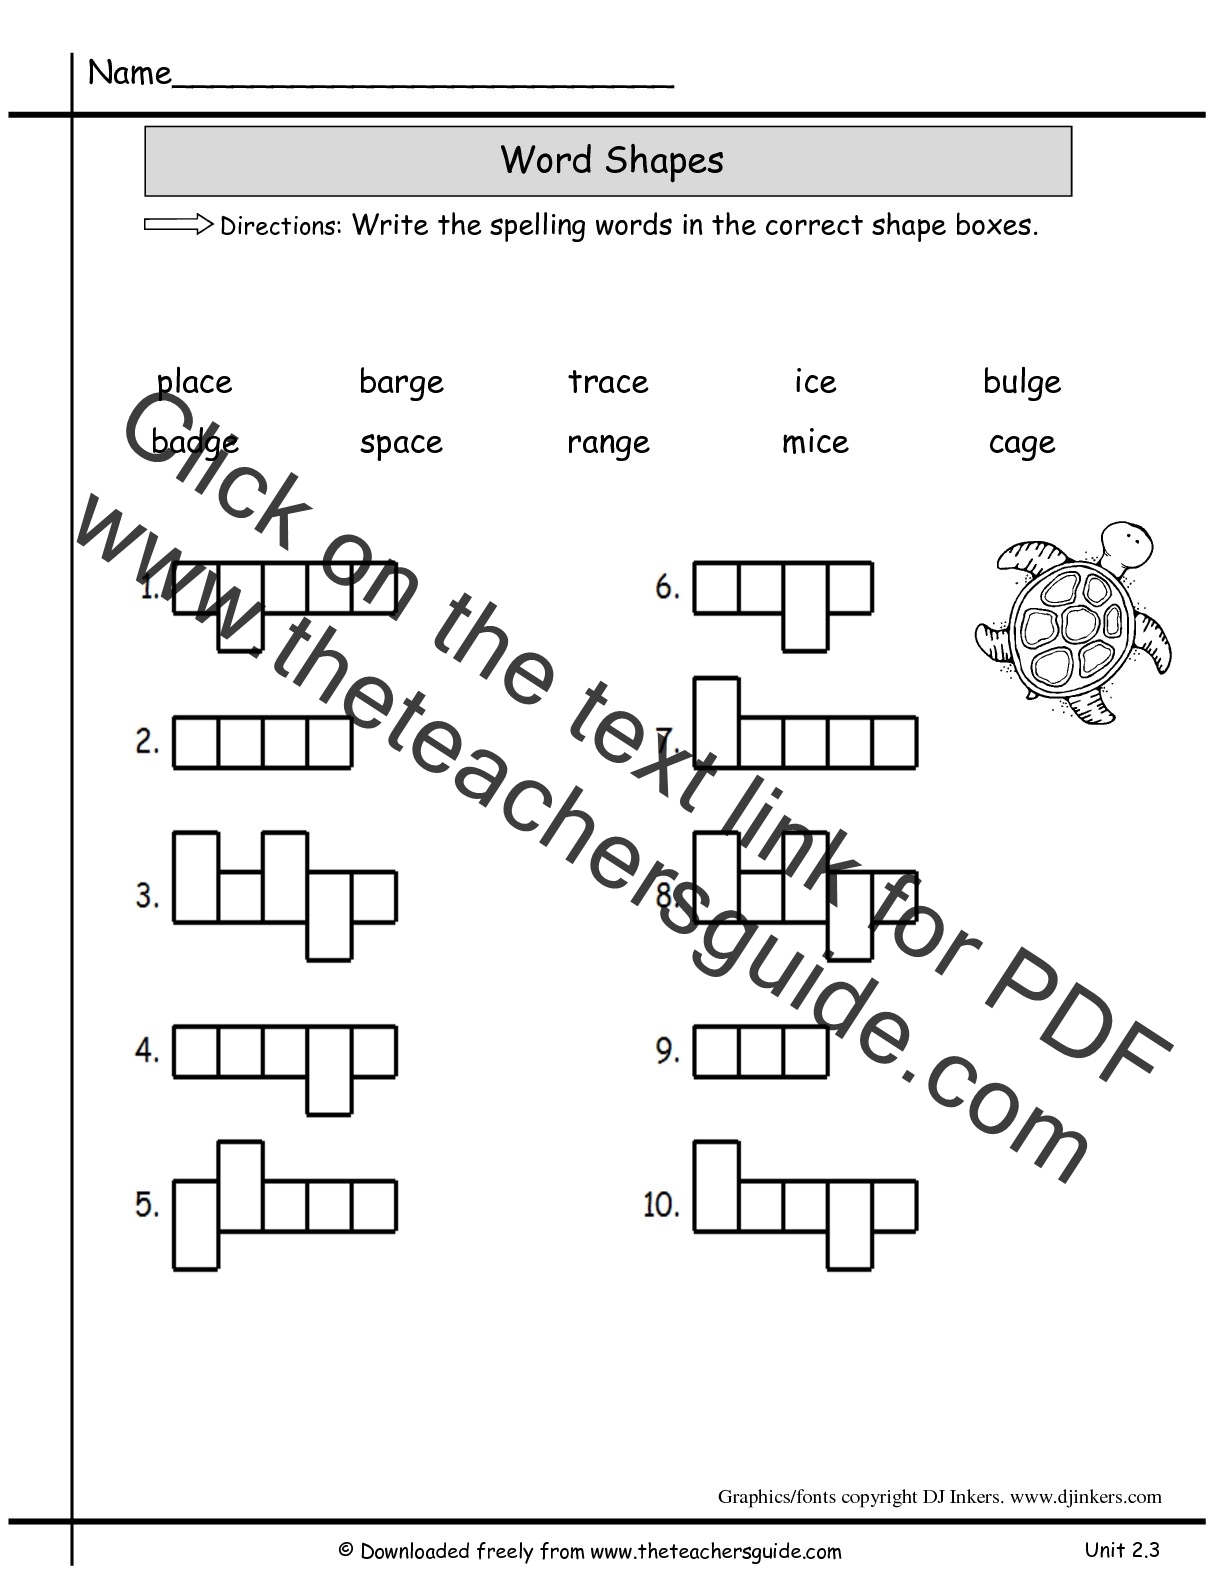 Second grade writing prompts worksheets for 2nd